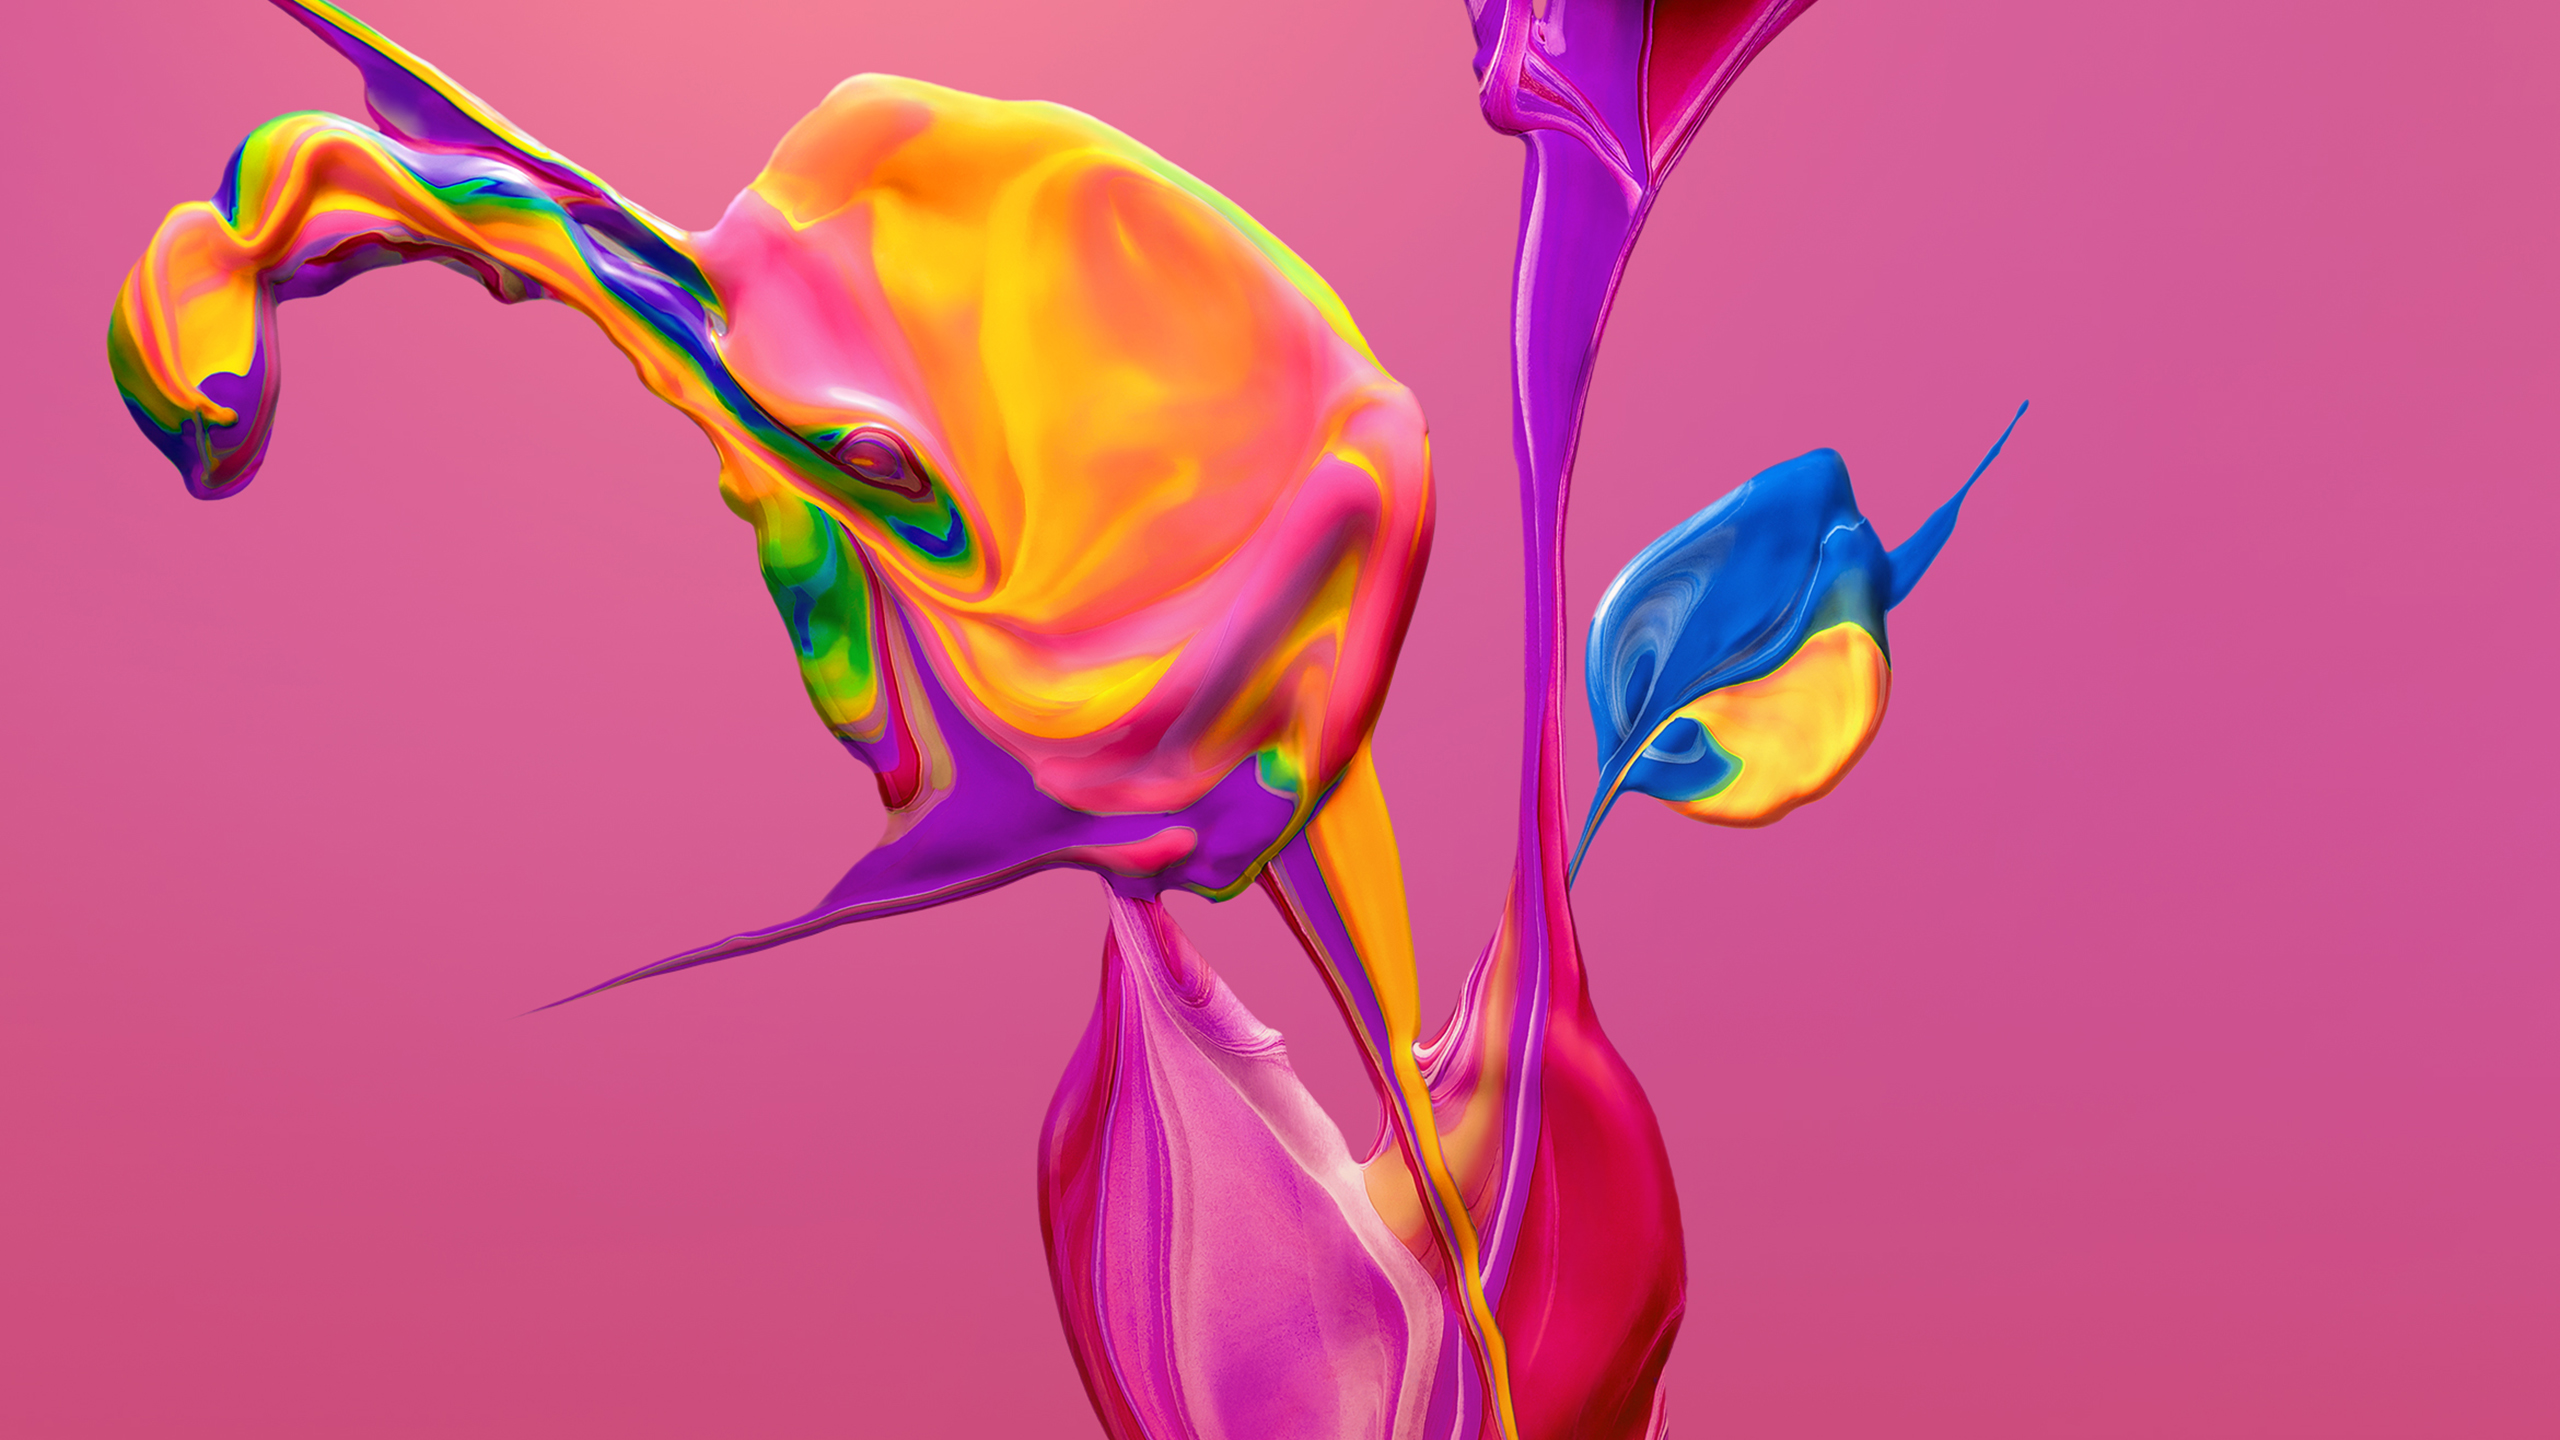 Paint Huawei P30 Pro Stock Wallpapers - Iphone Xs Max Pro - HD Wallpaper 